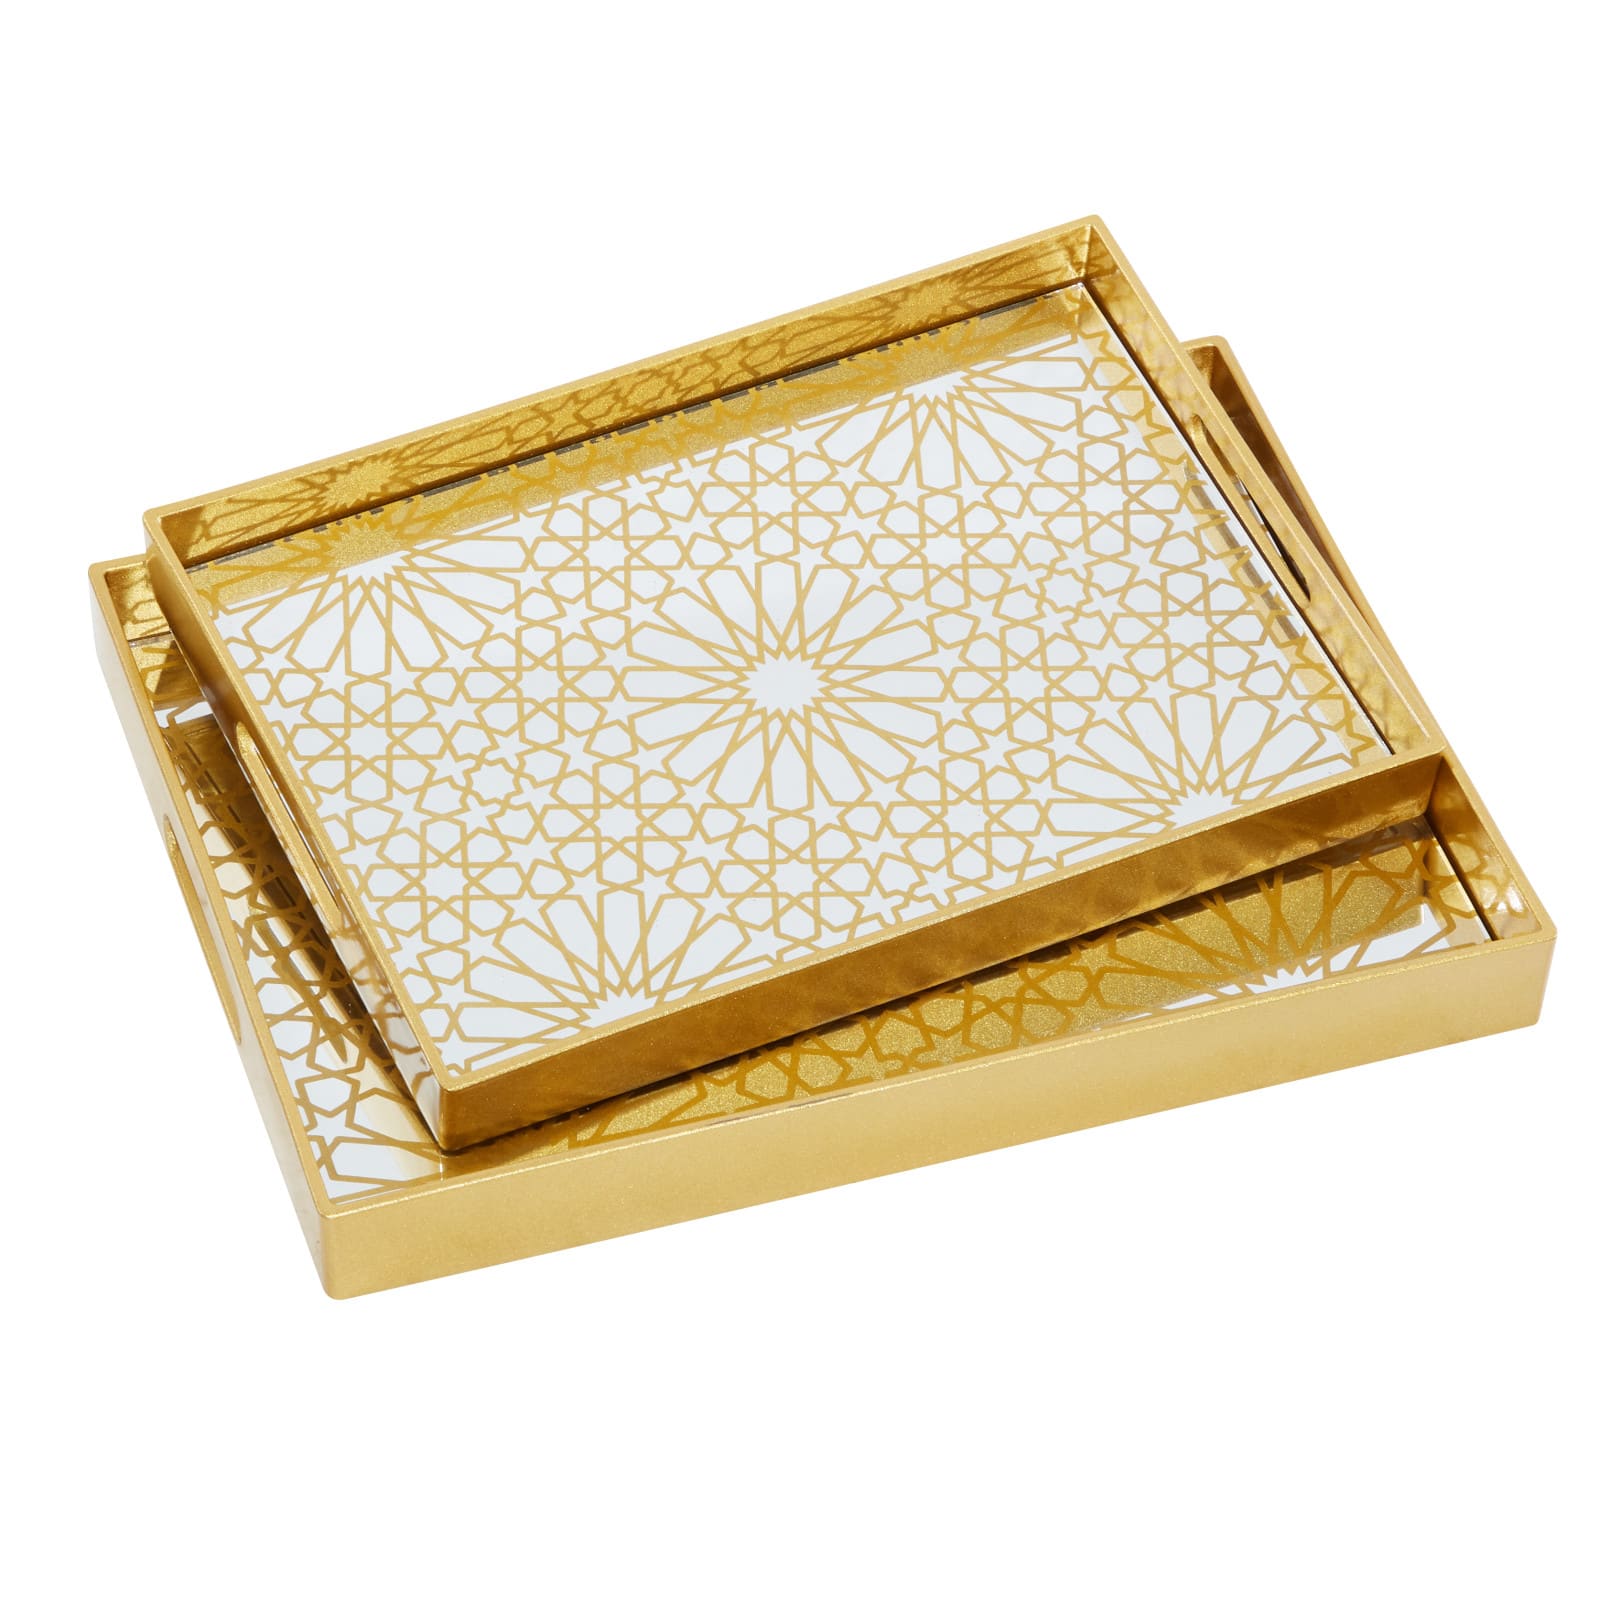 CosmoLiving by Cosmopolitan Gold Plastic Glam Decorative Tray Set